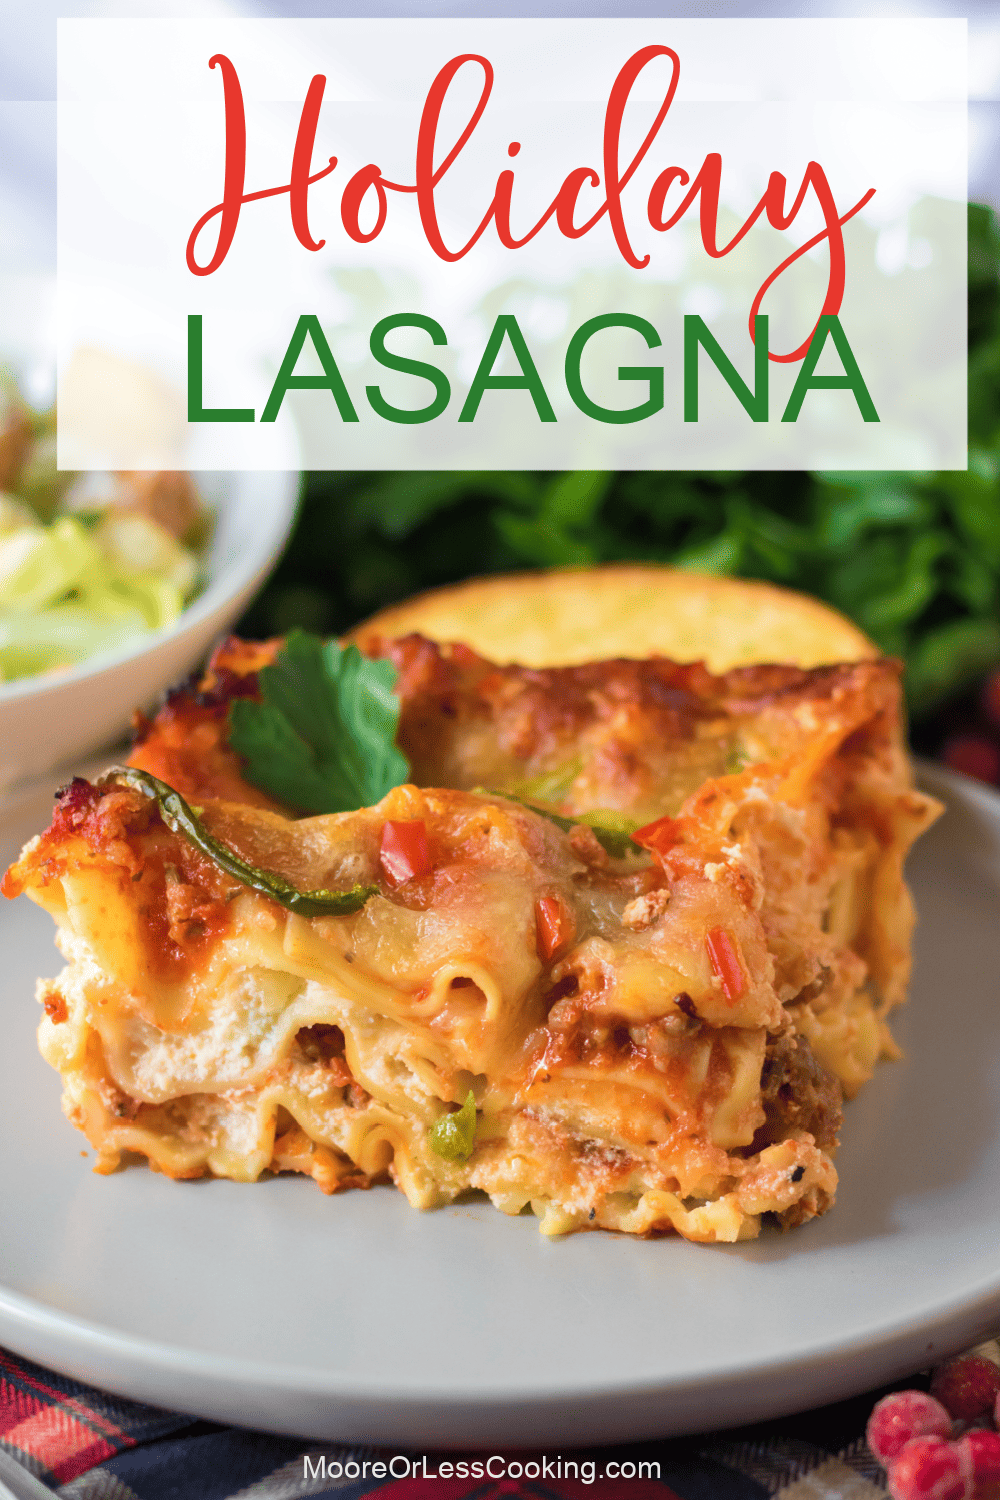 This make-ahead Holiday Lasagna is stacked with savory ingredients and baked to bubbly and cheesy goodness, making it a winner for any seasonal celebration. Feed a crowd with this pasta meal that's perfect for serving at Thanksgiving, Christmas, or New Year's. via @Mooreorlesscook